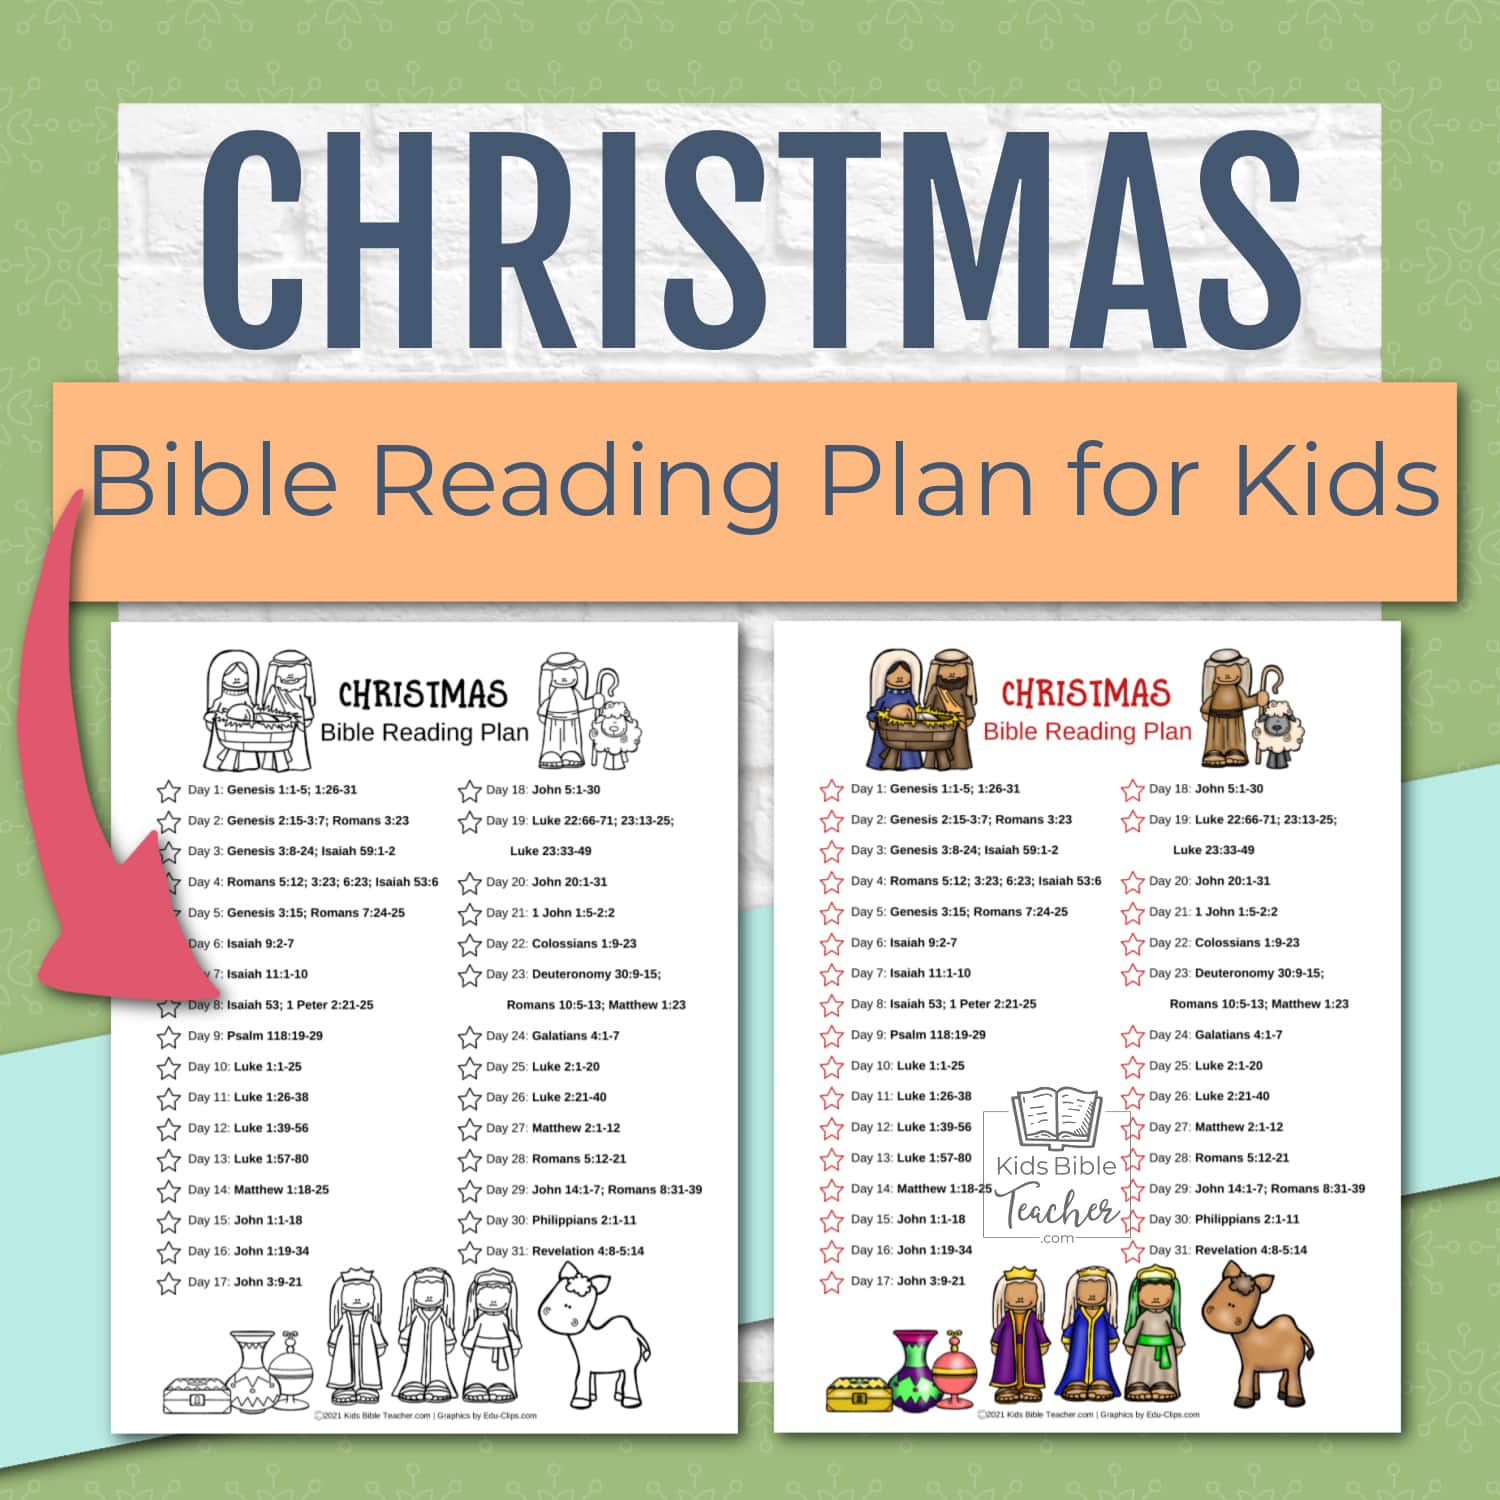 Help your kids discover God's beautiful plan of salvation this Christmas with this FREE Printable Christmas Bible Reading Plan - perfect for the month of December!